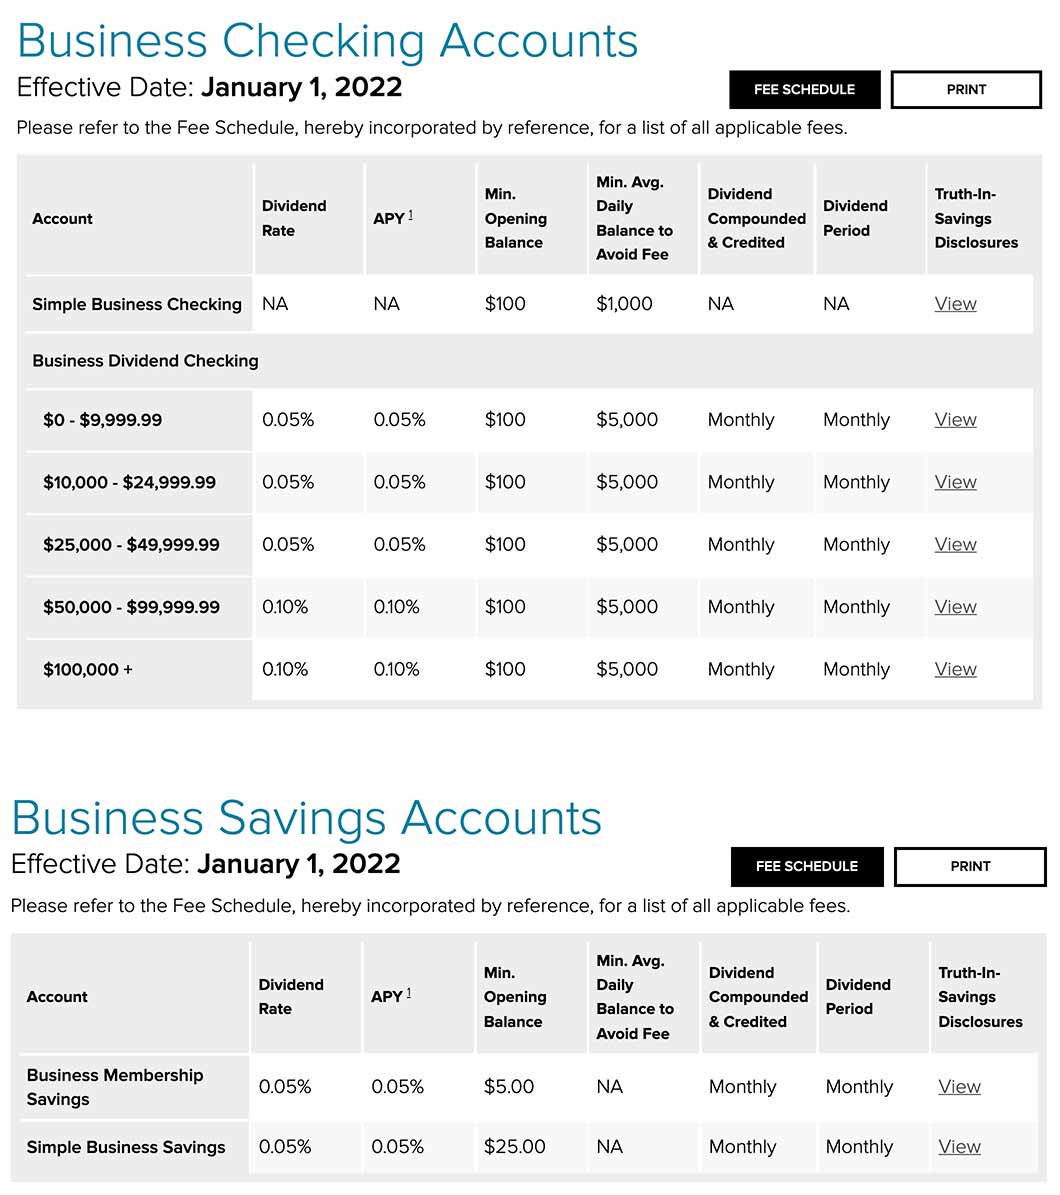 Tables showing the dividend rates, annual percentage yields, opening balances and more for First Tech Federal Credit Union’s business checking and savings accounts